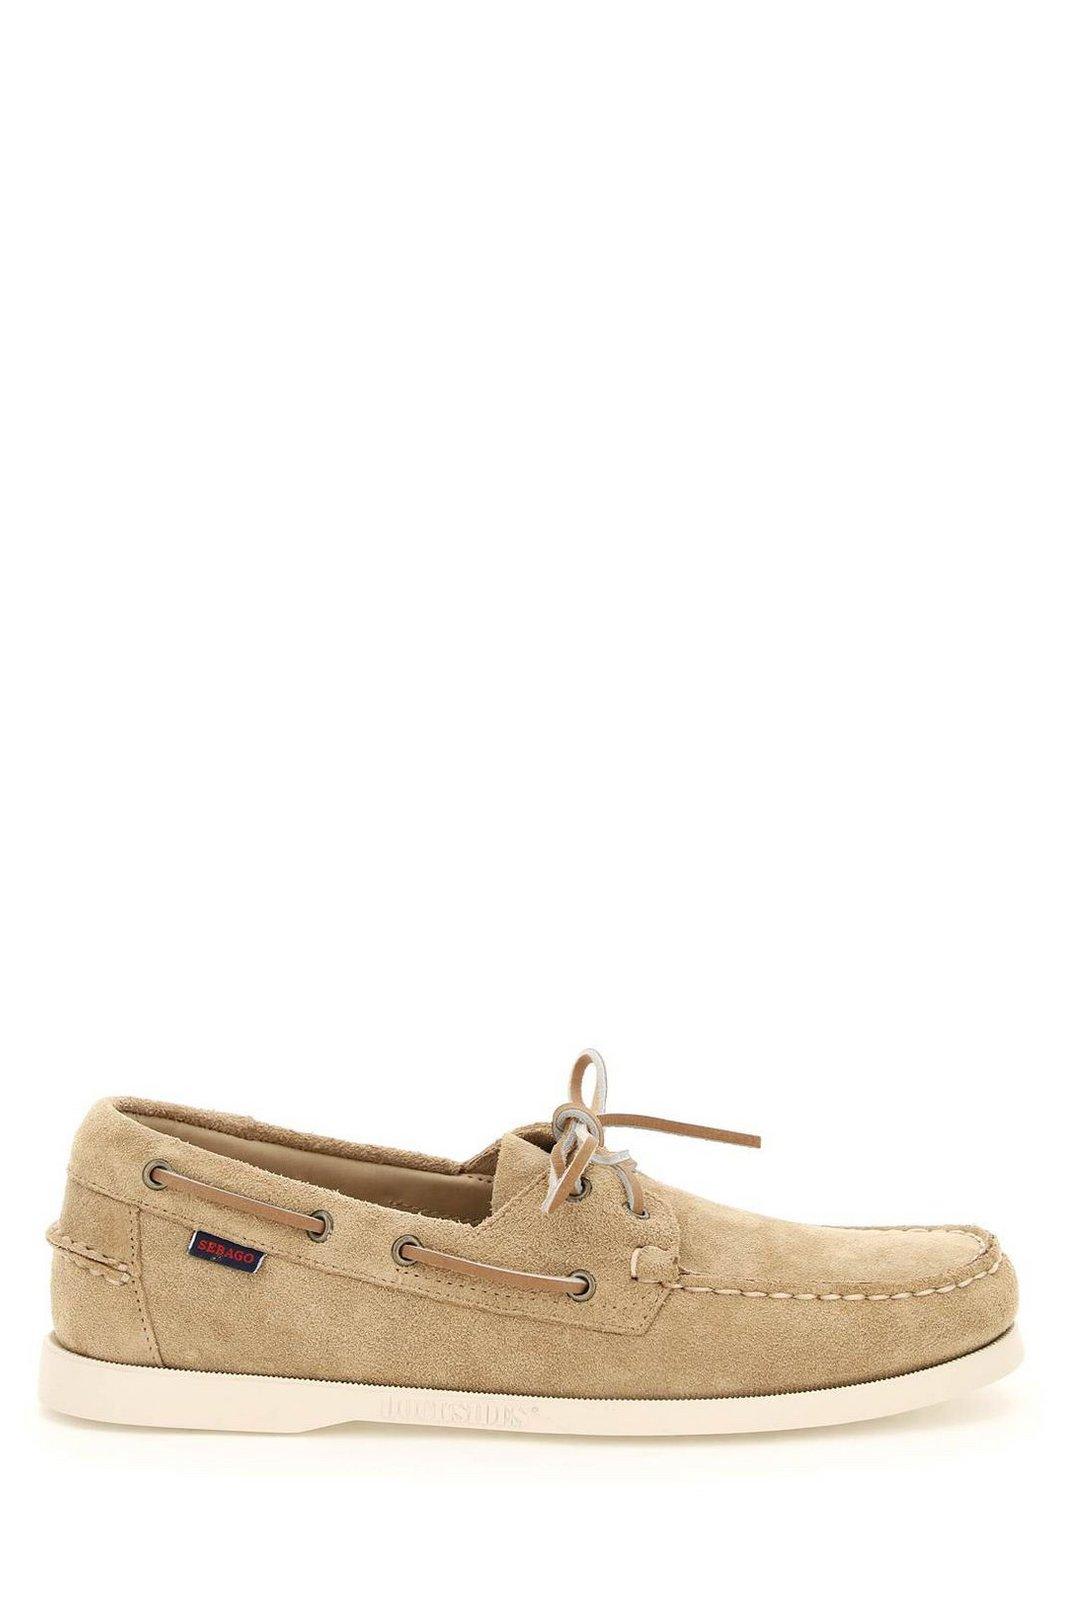 Sebago Lace-up Round Toe Boat Shoes In Beige Camel